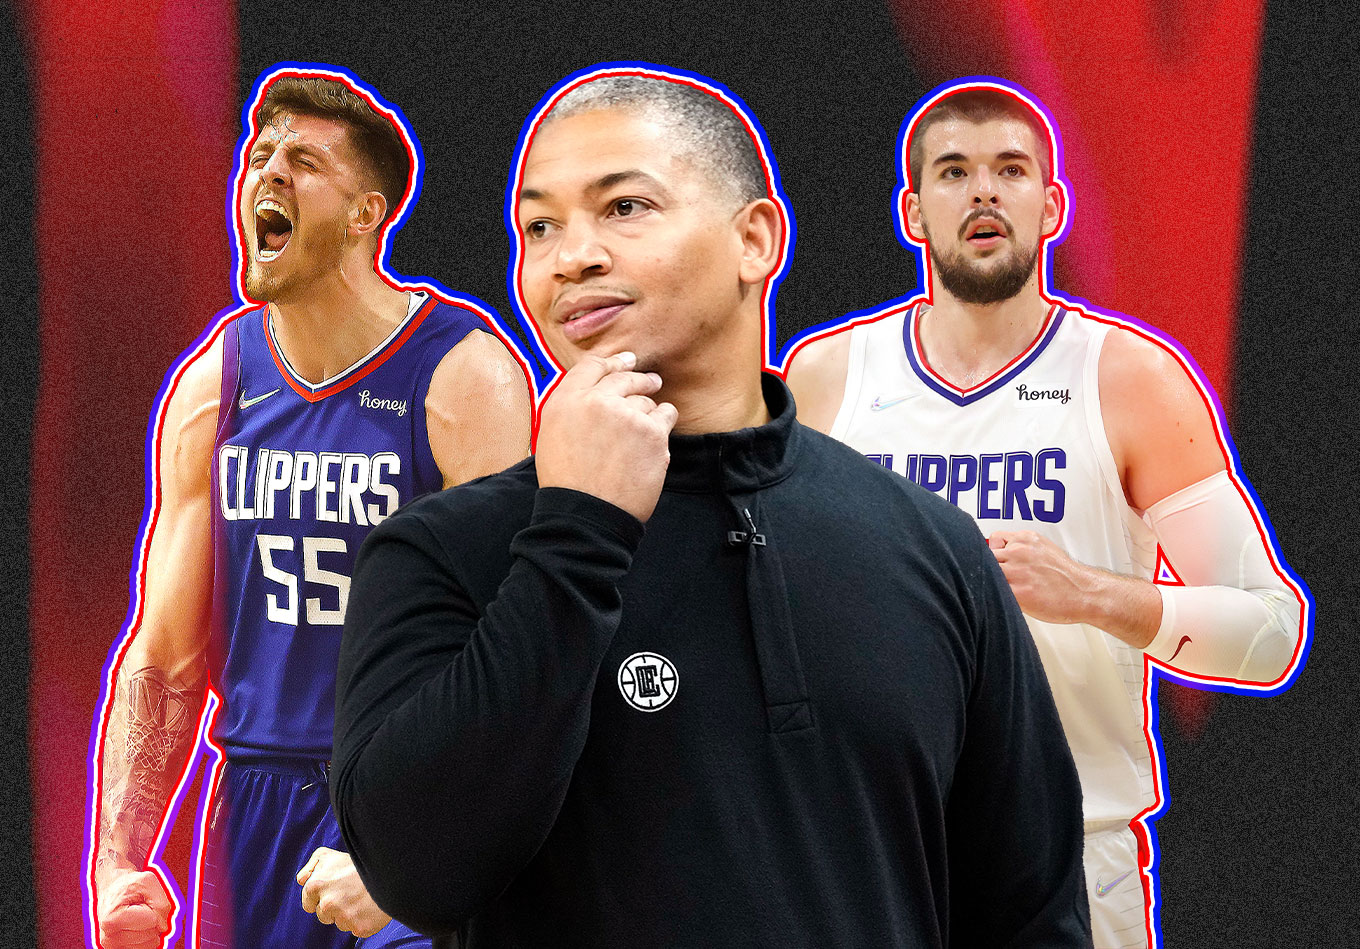 More Than a Figurehead: How Tyronn Lue Has the Battered Clippers in the Playoff Hunt